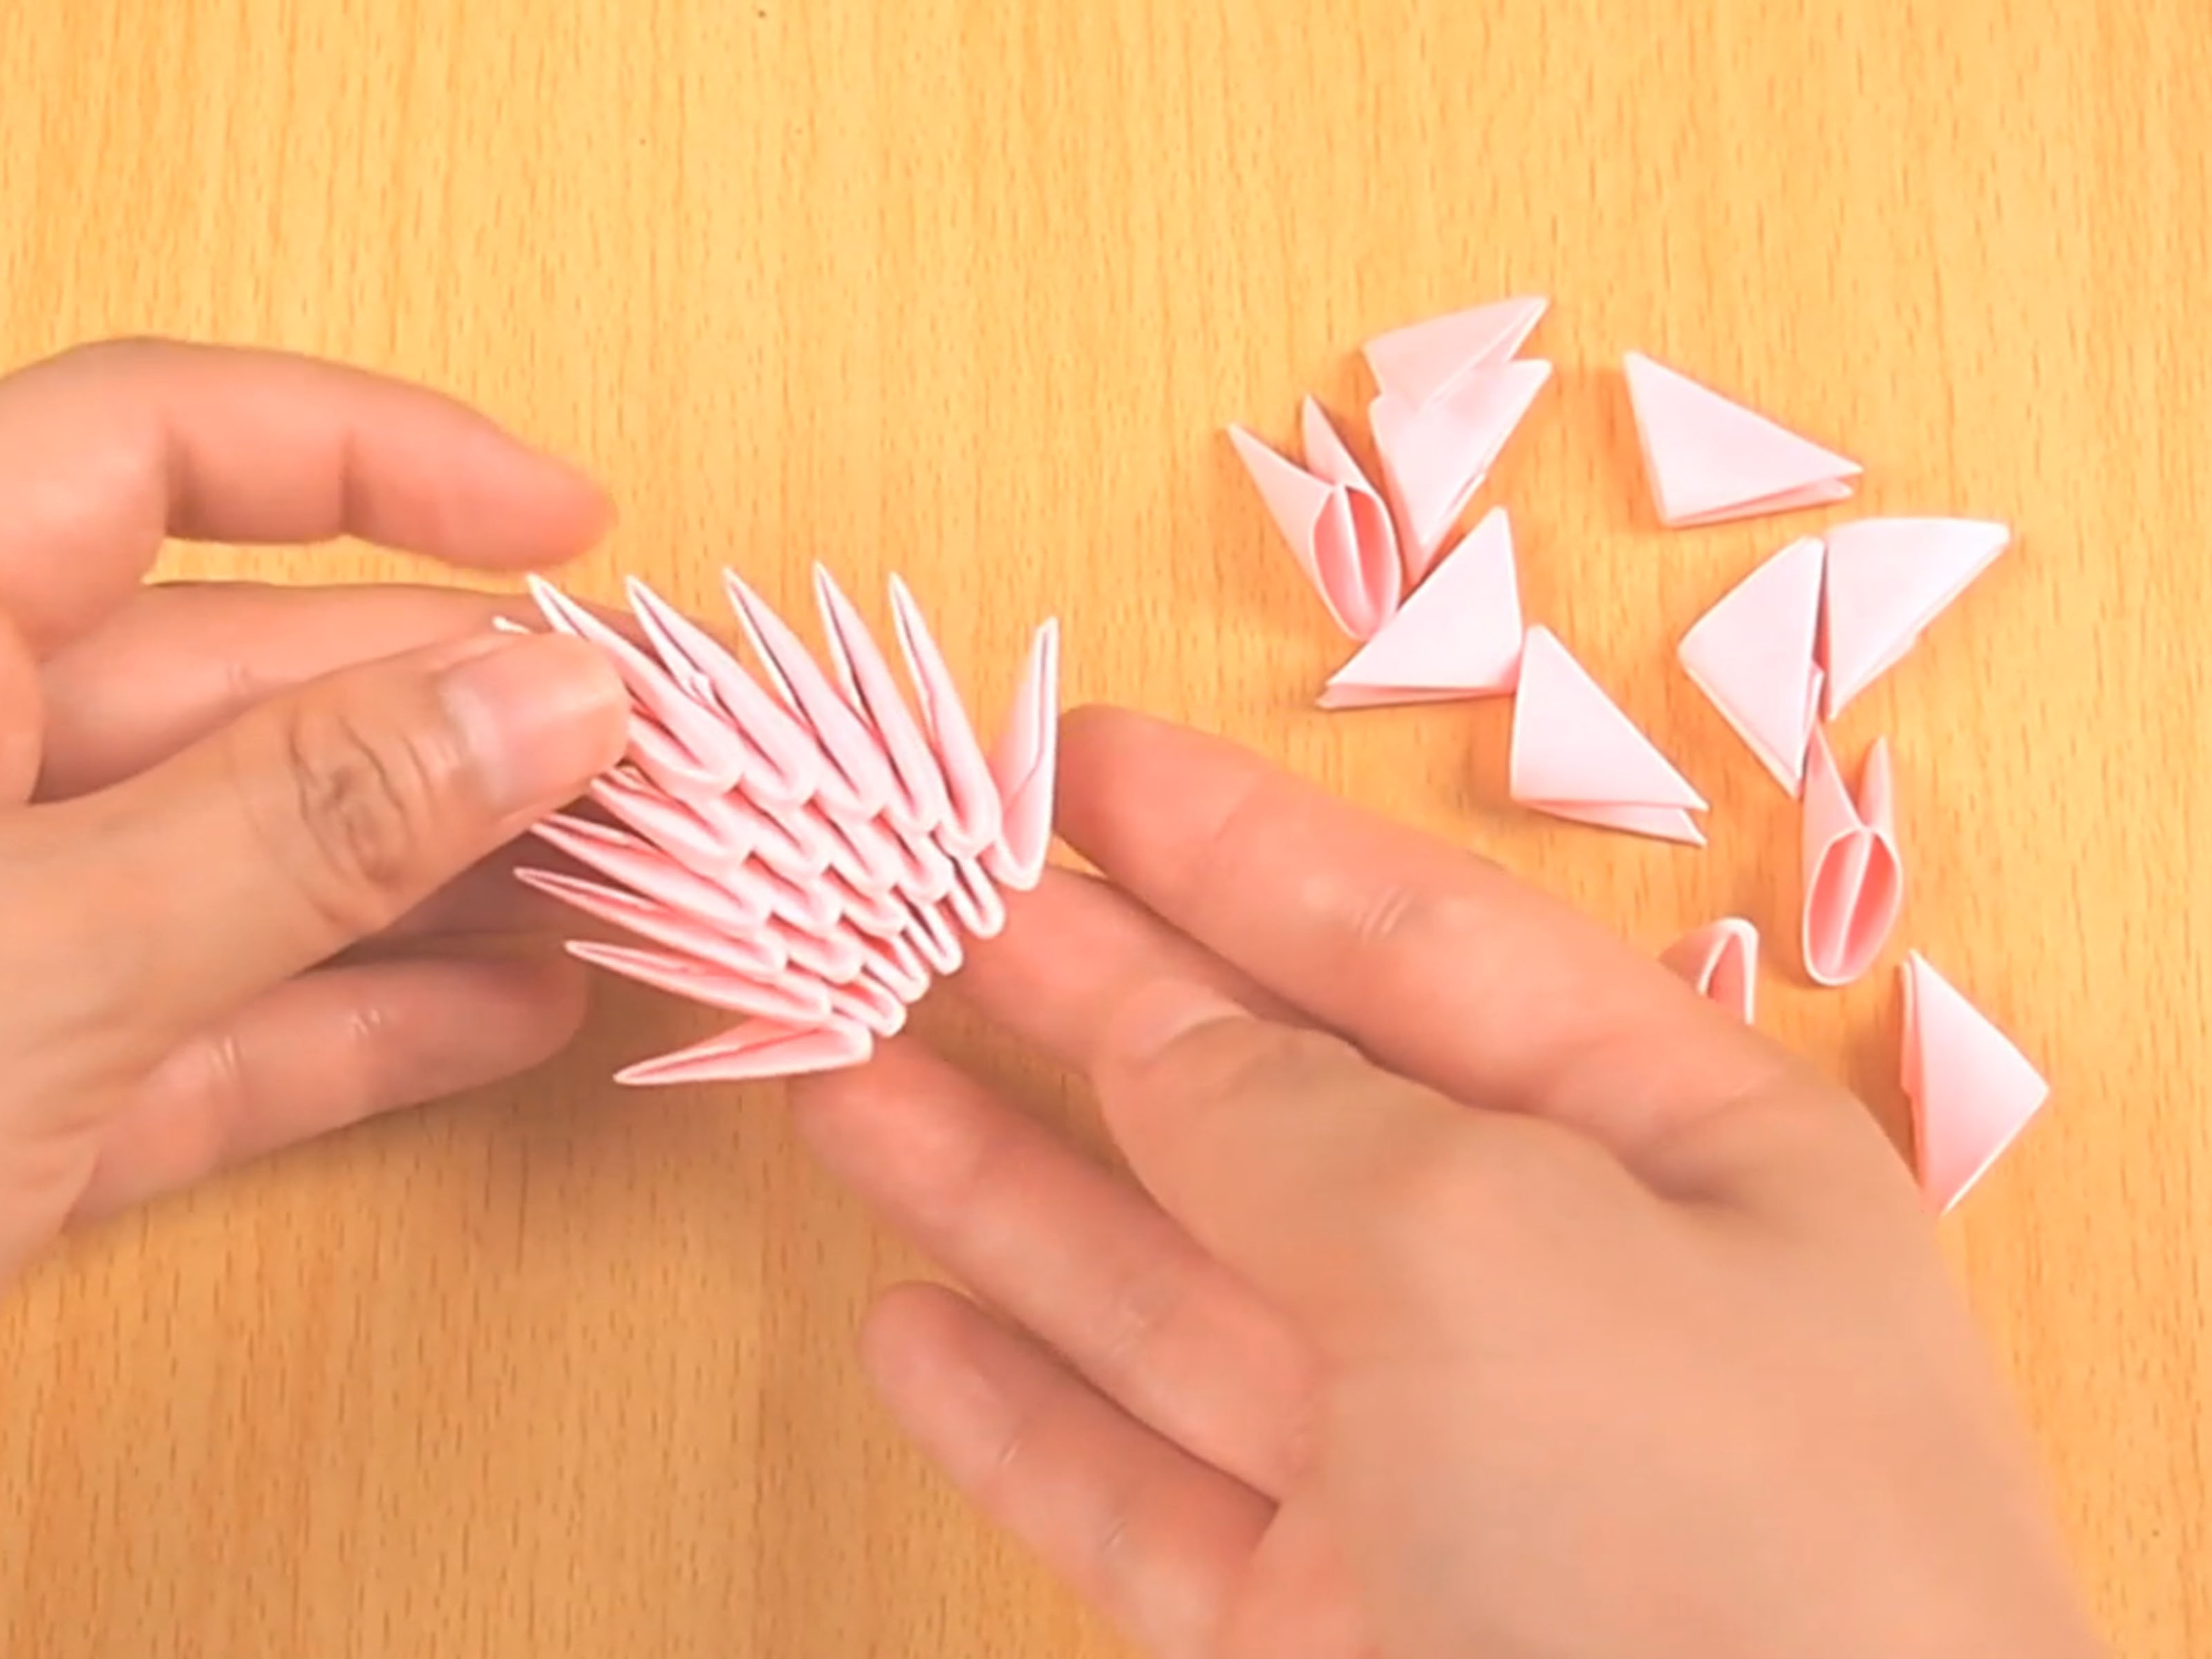 How To Make 3D Origami Pieces How To Make 3d Origami Pieces With Pictures Wikihow